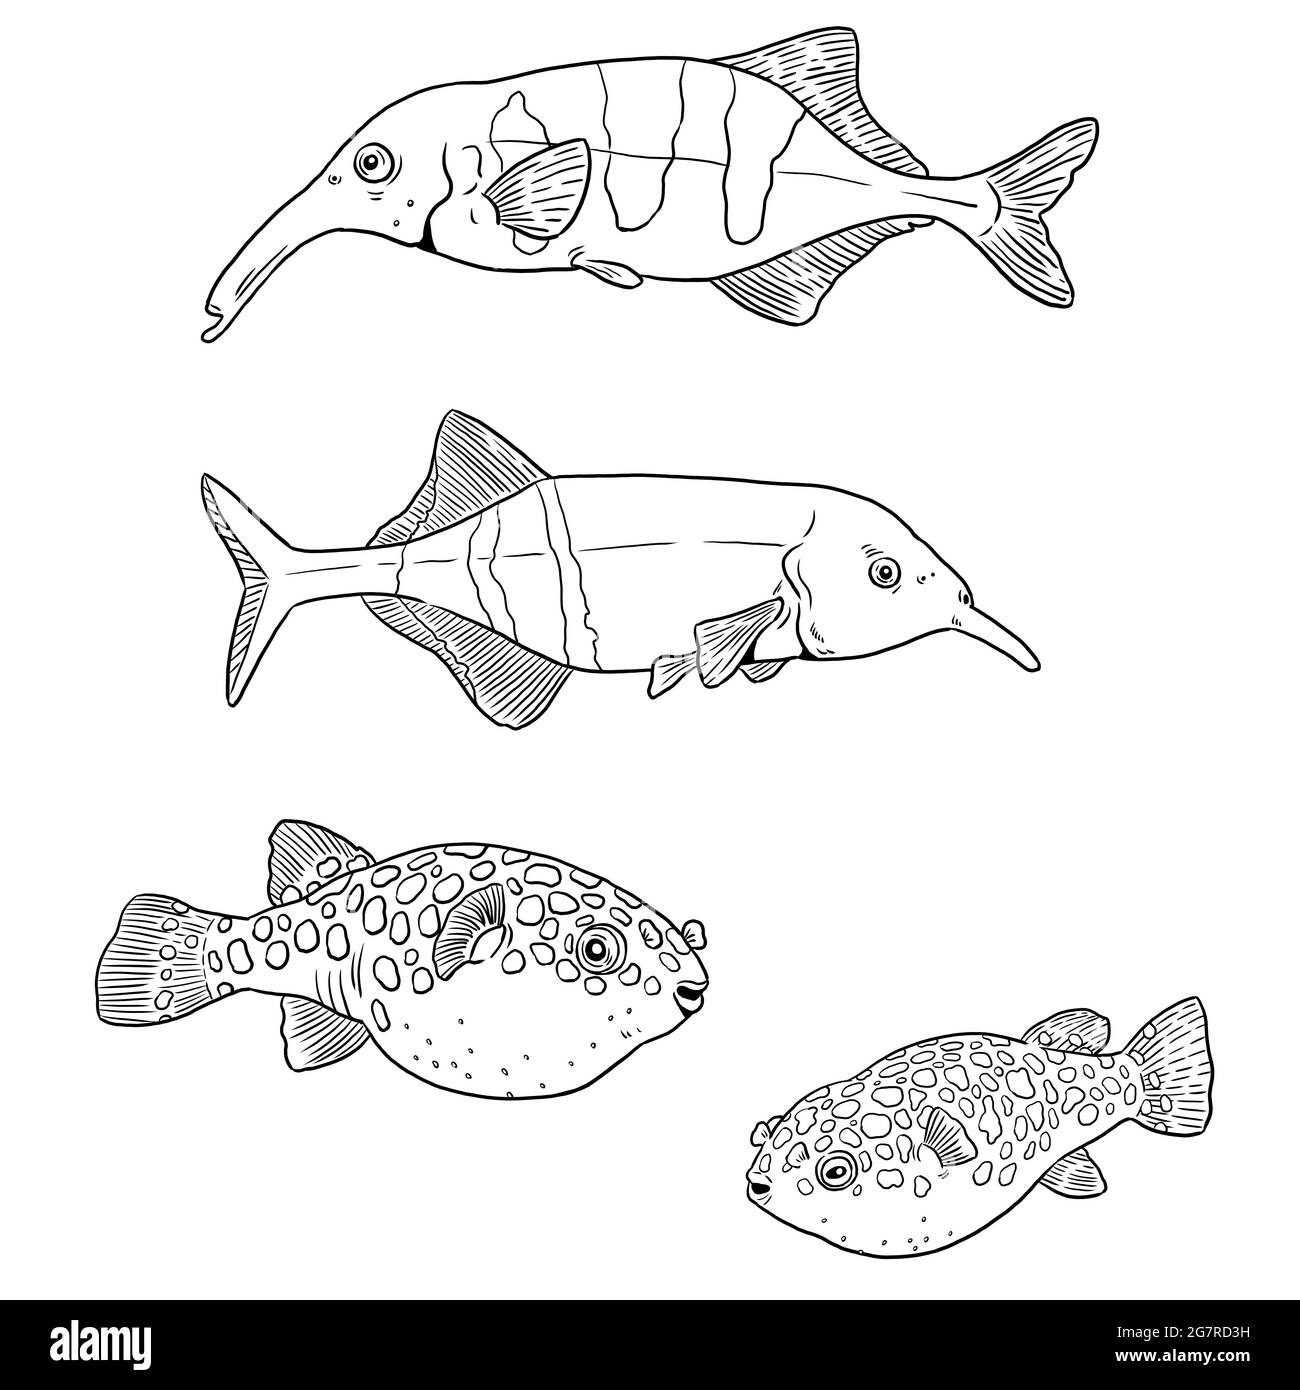 Aquarium with tetraodon and elephantnose fish for coloring. Colorful tropical fish templates. Coloring book for children and adults. Stock Photo